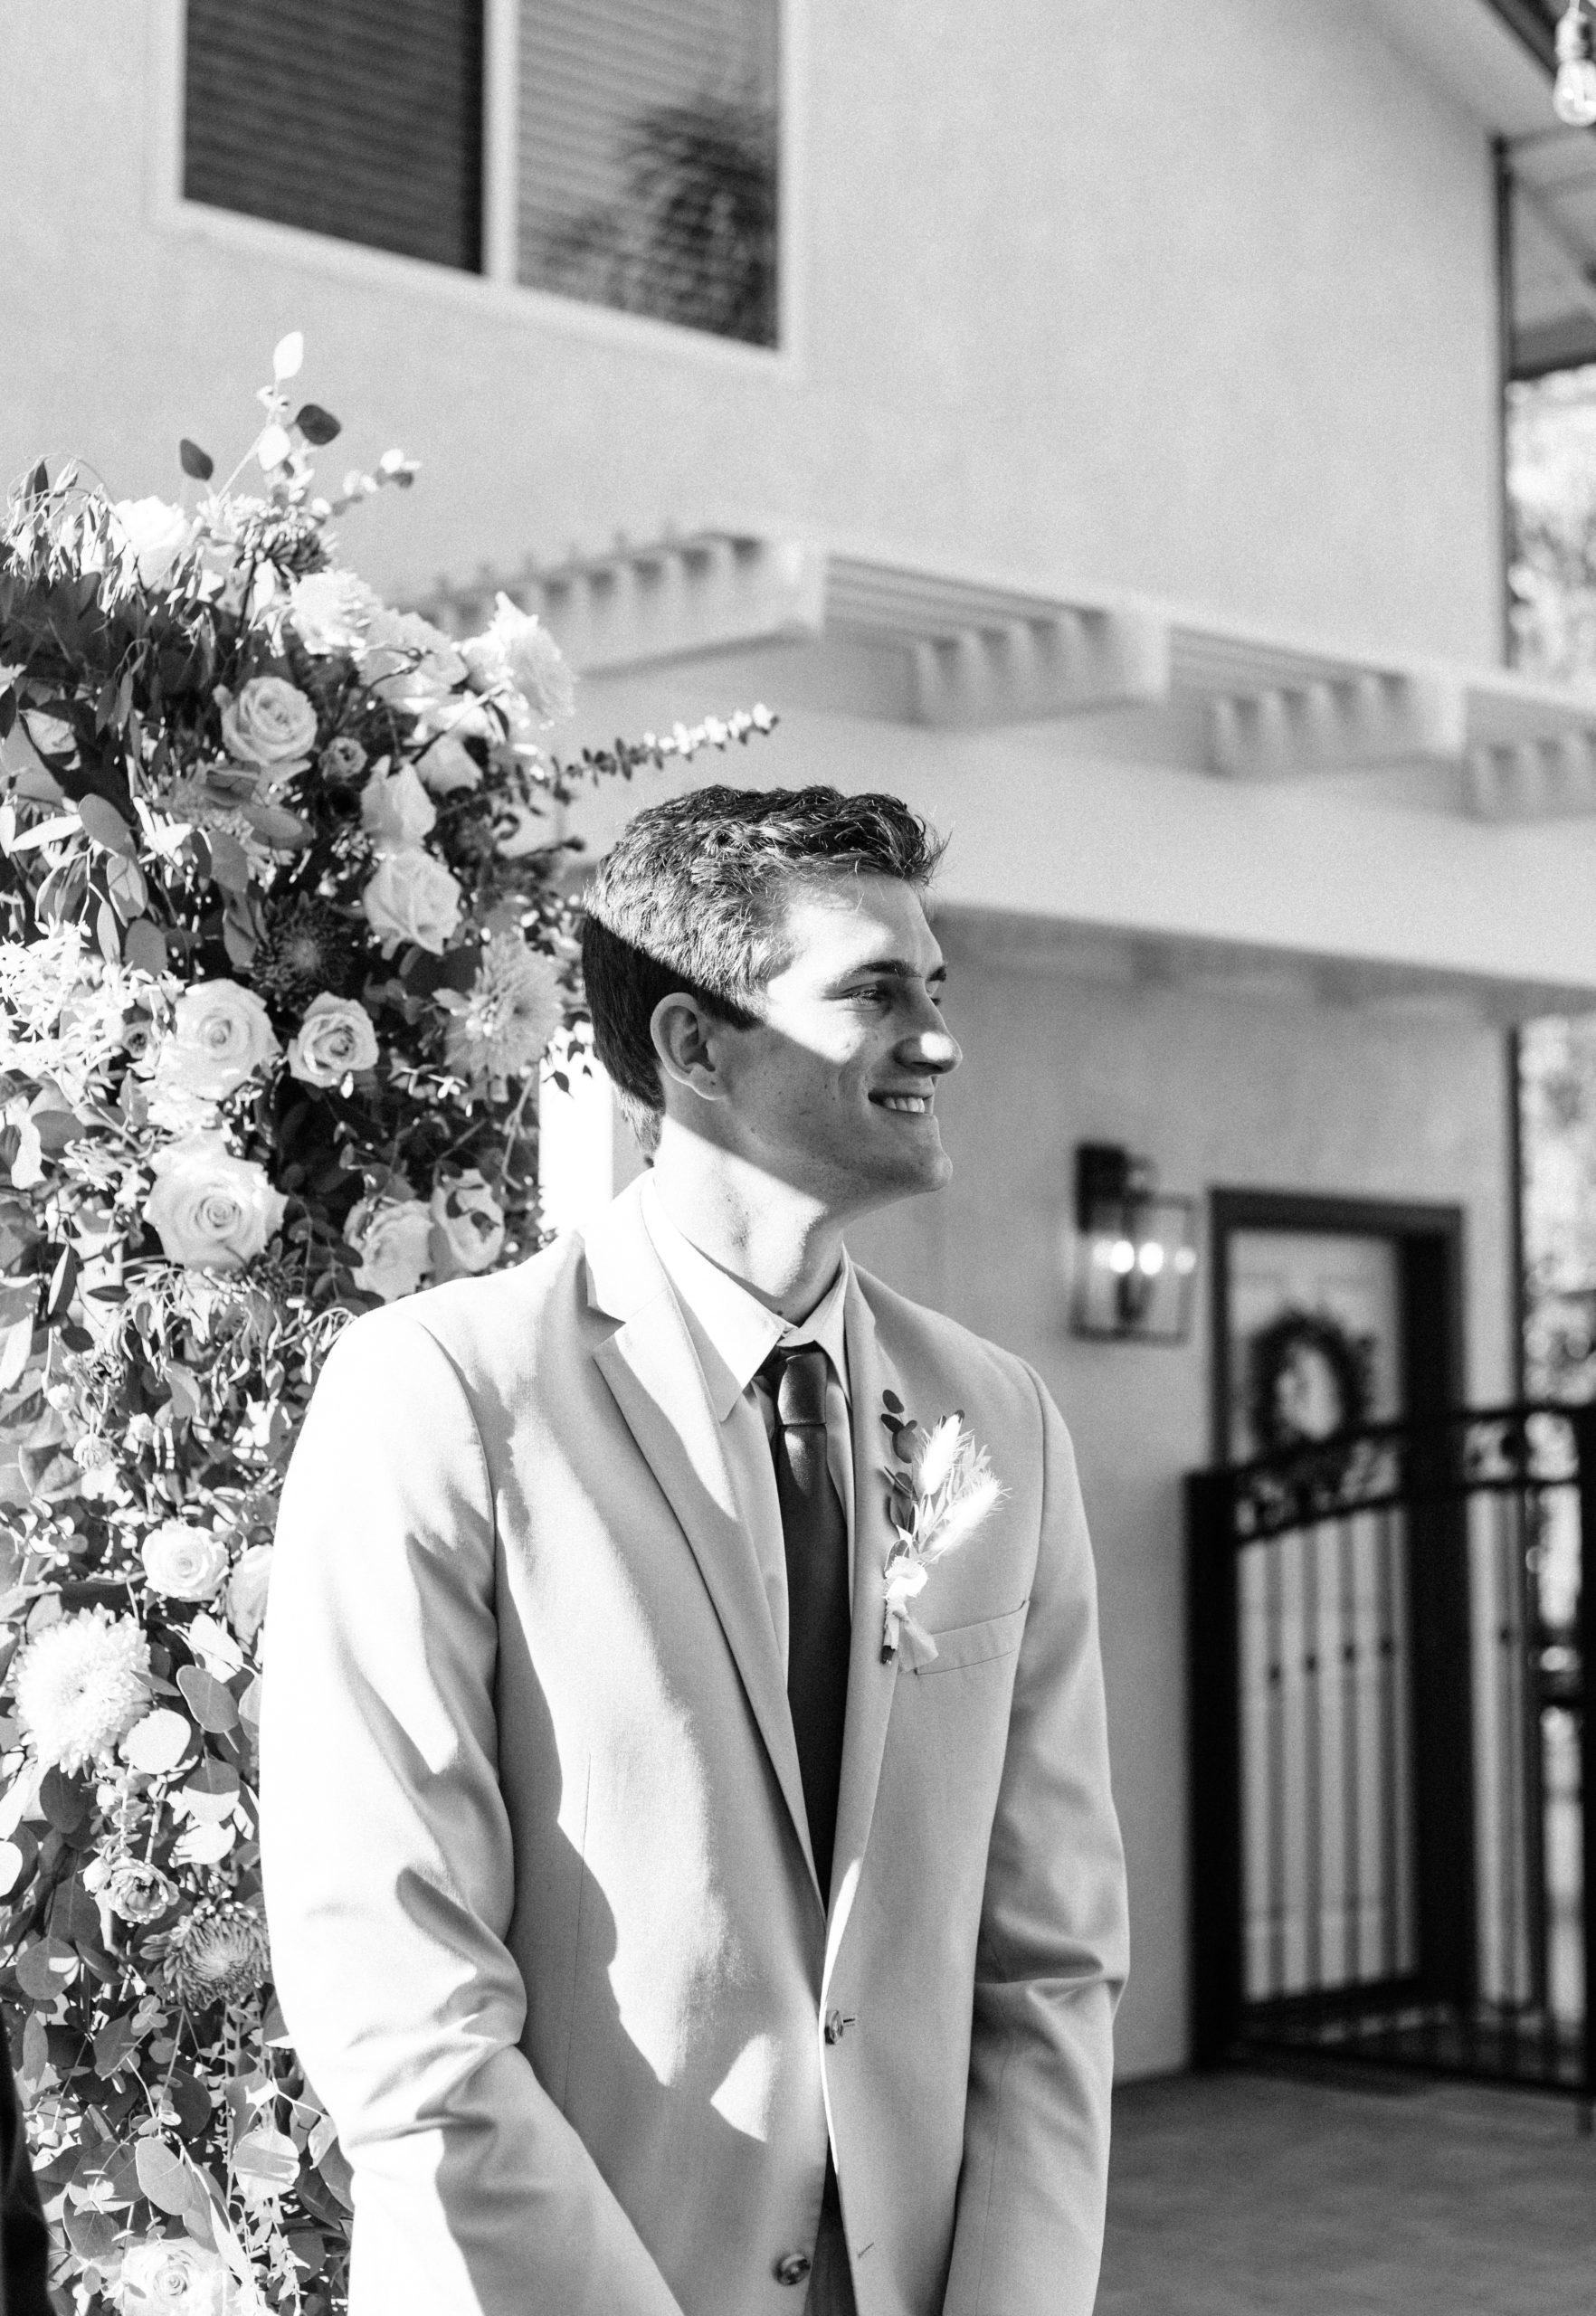 The groom watching the bride walk down the aisle during the wedding ceremony in Temecula